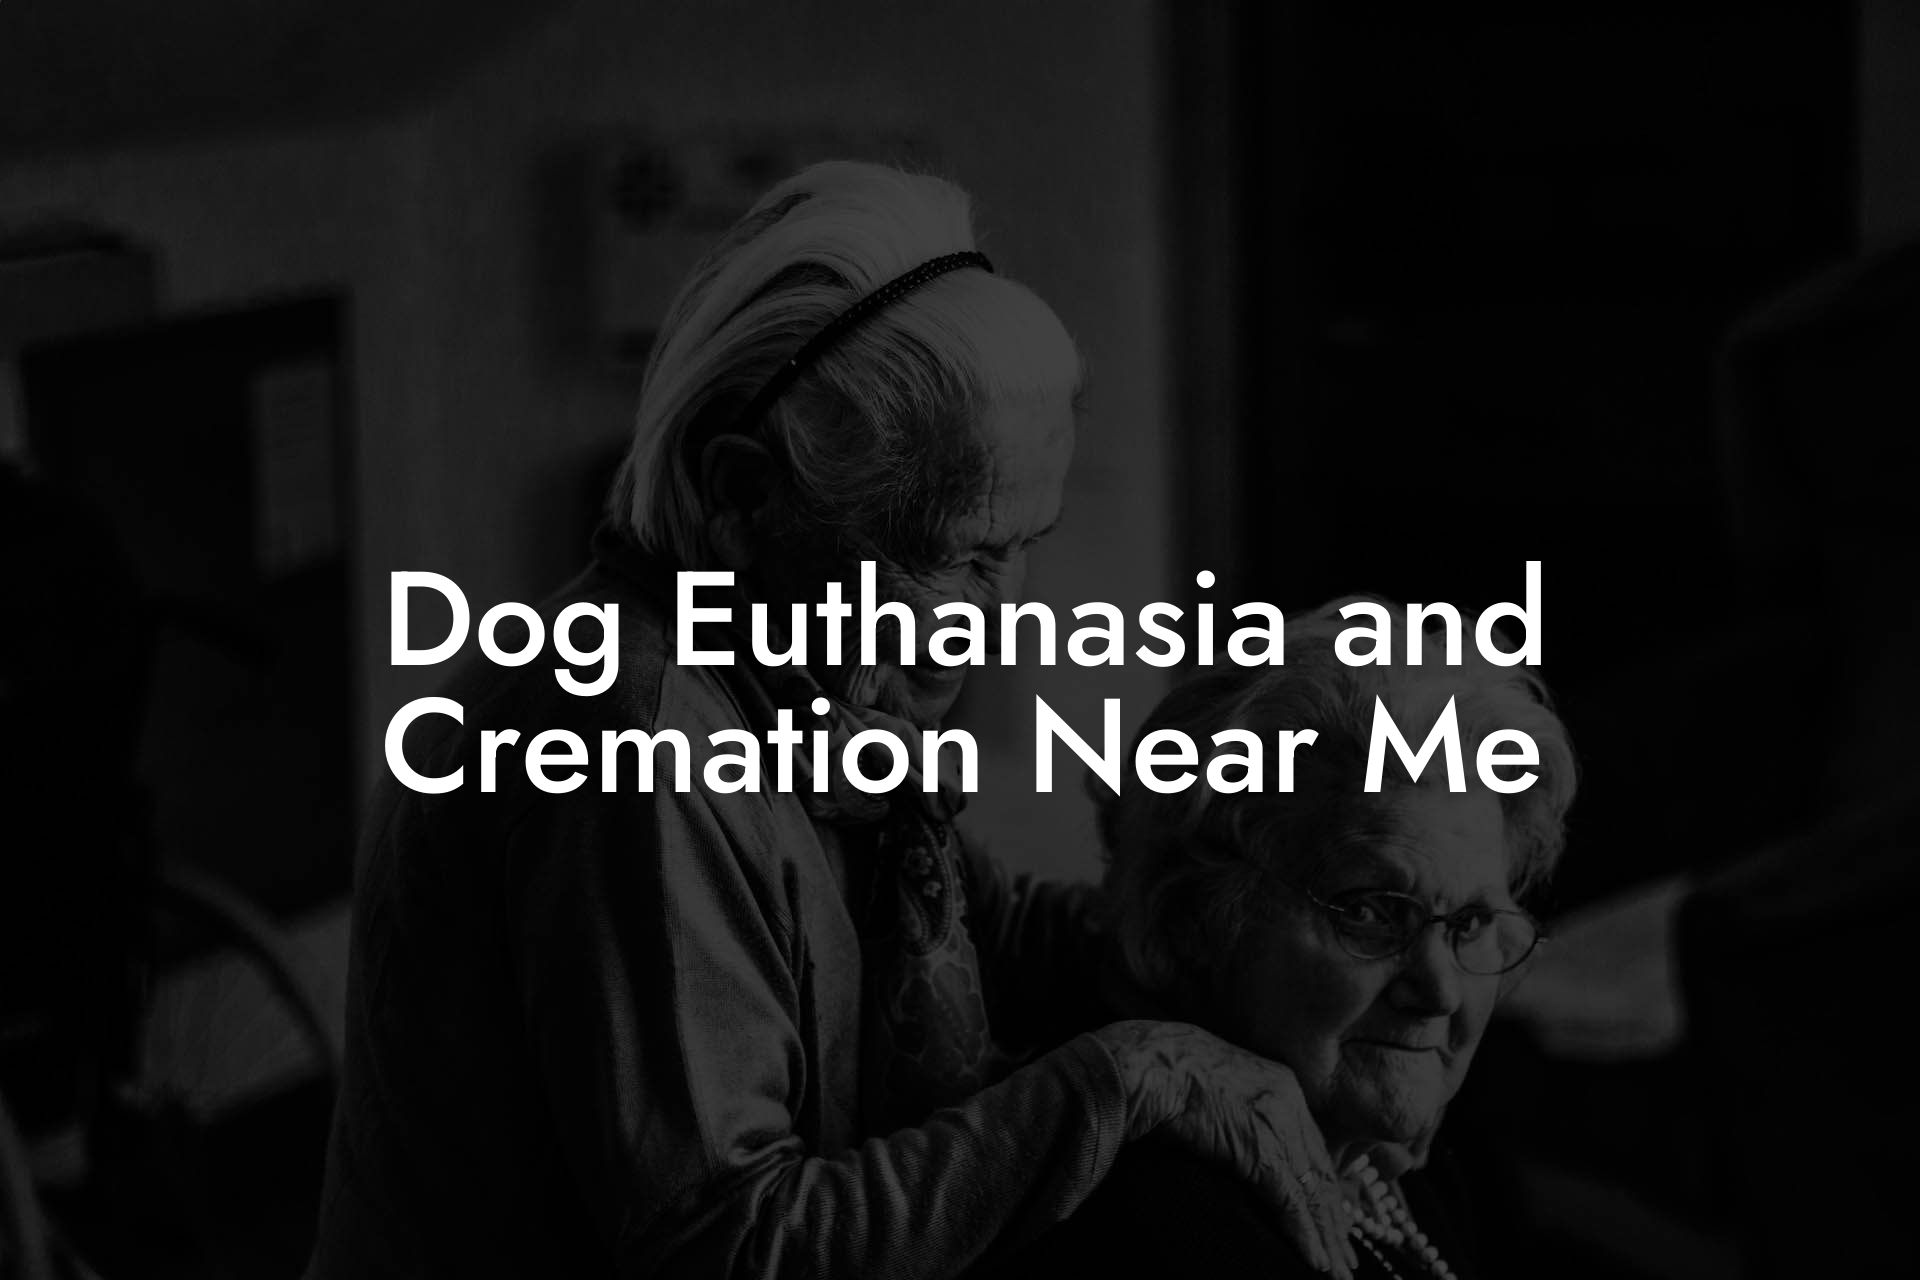 Dog Euthanasia and Cremation Near Me